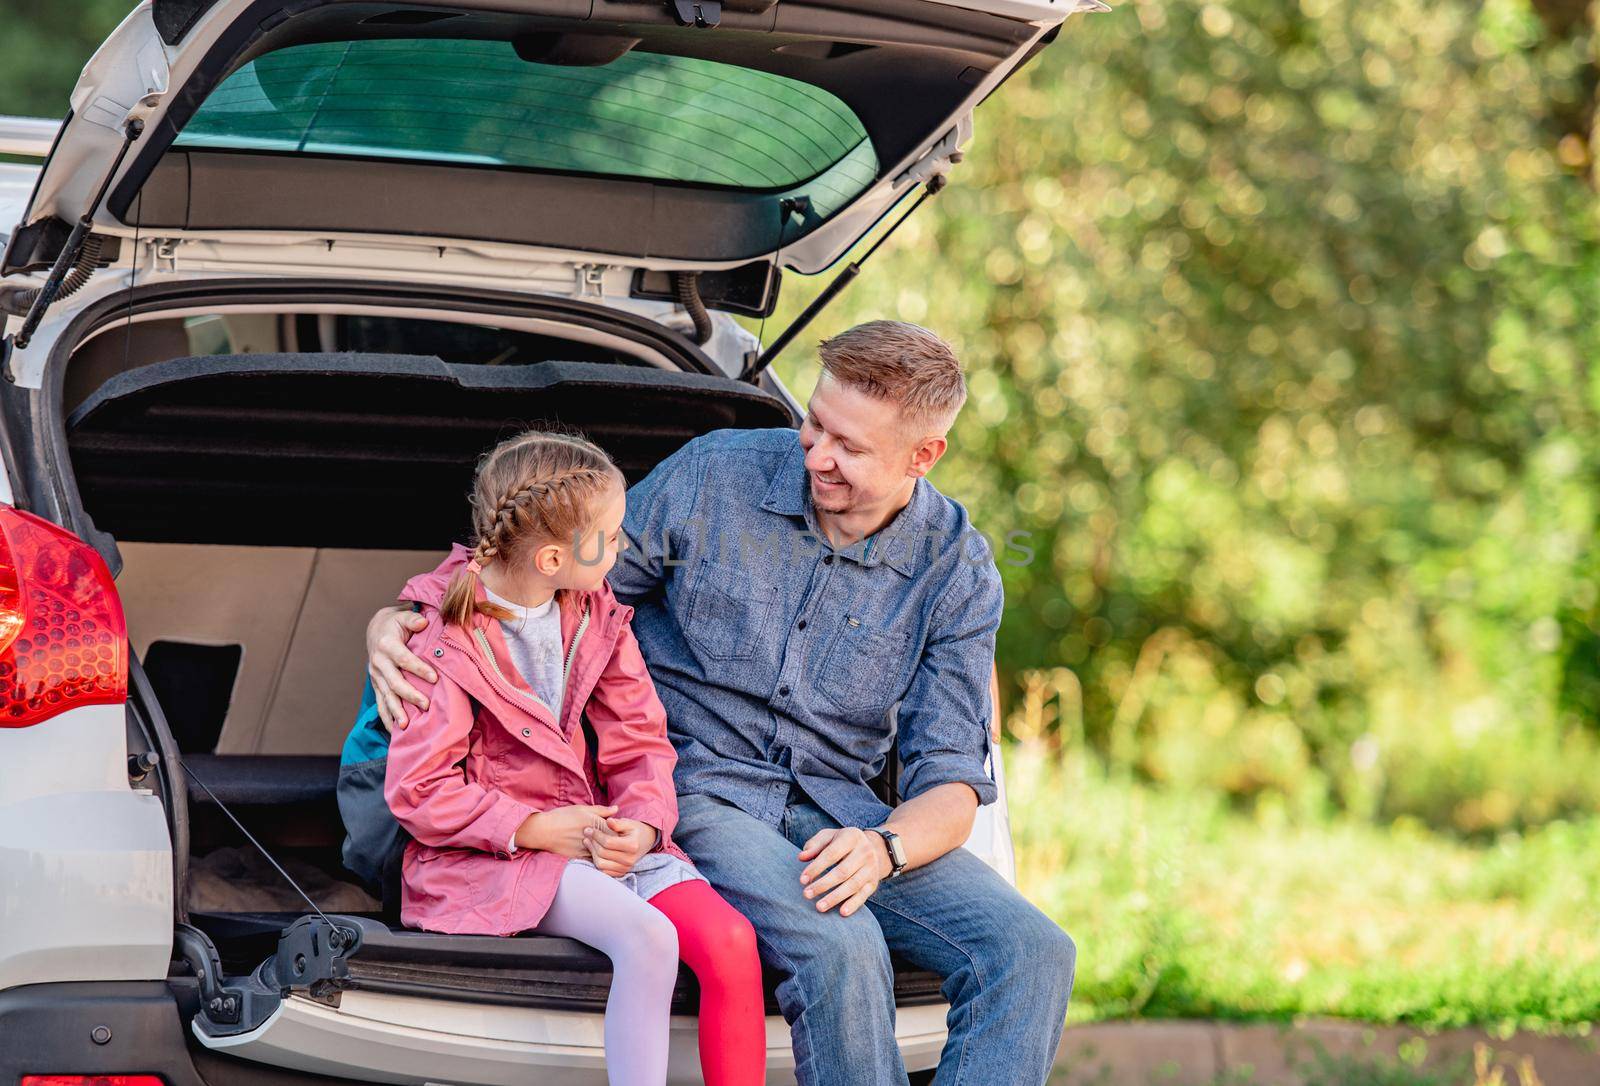 Father with daughter sitting on car trunk after schooling